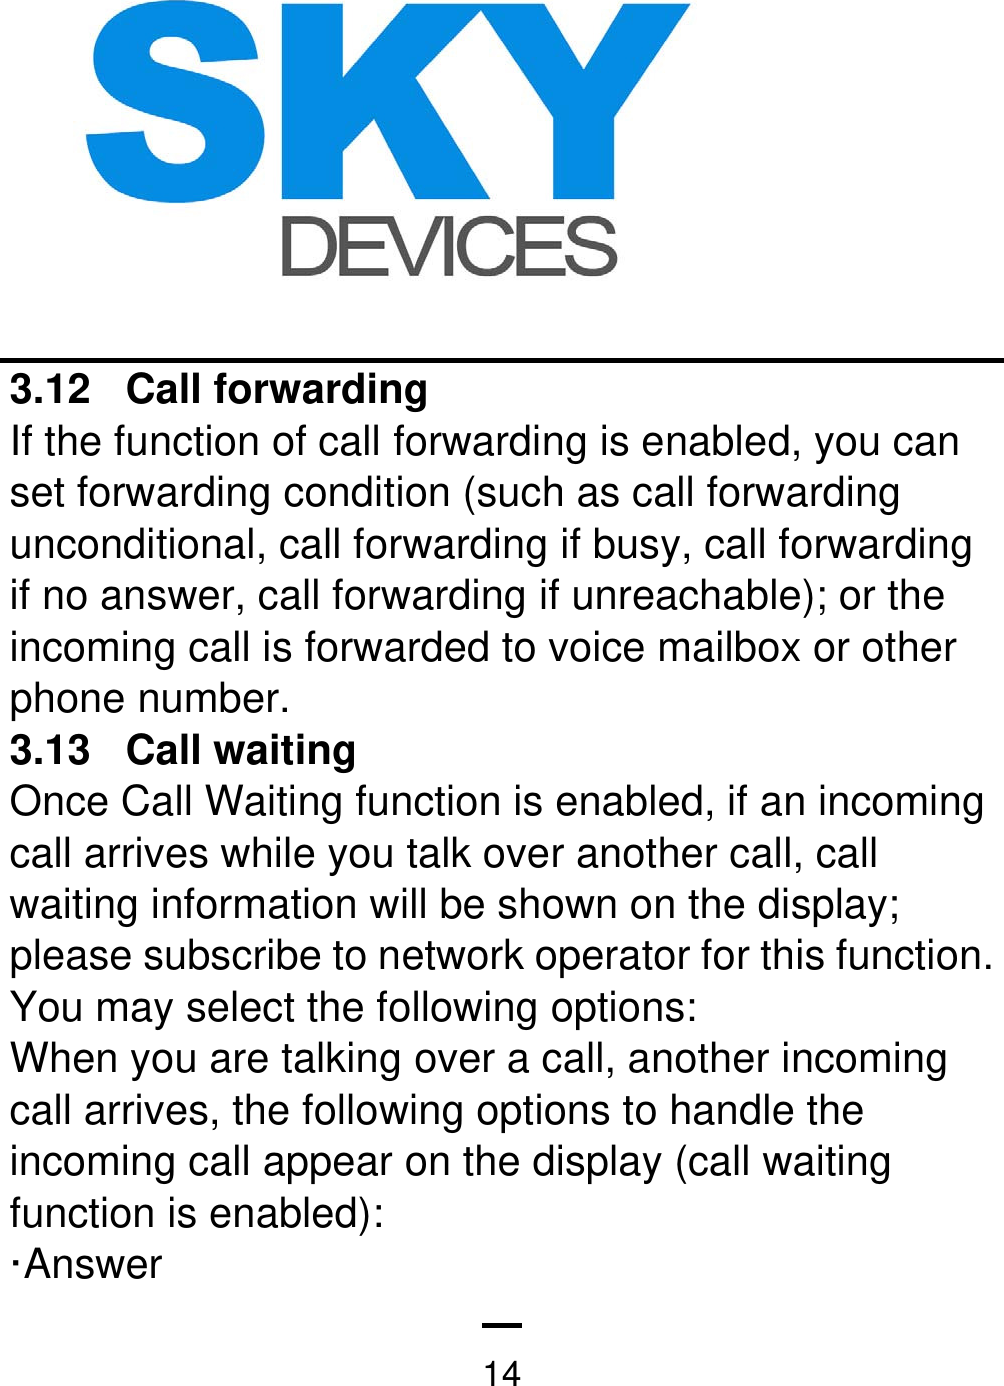   143.12 Call forwarding If the function of call forwarding is enabled, you can set forwarding condition (such as call forwarding unconditional, call forwarding if busy, call forwarding if no answer, call forwarding if unreachable); or the incoming call is forwarded to voice mailbox or other phone number.   3.13 Call waiting Once Call Waiting function is enabled, if an incoming call arrives while you talk over another call, call waiting information will be shown on the display; please subscribe to network operator for this function. You may select the following options: When you are talking over a call, another incoming call arrives, the following options to handle the incoming call appear on the display (call waiting function is enabled): ·Answer  